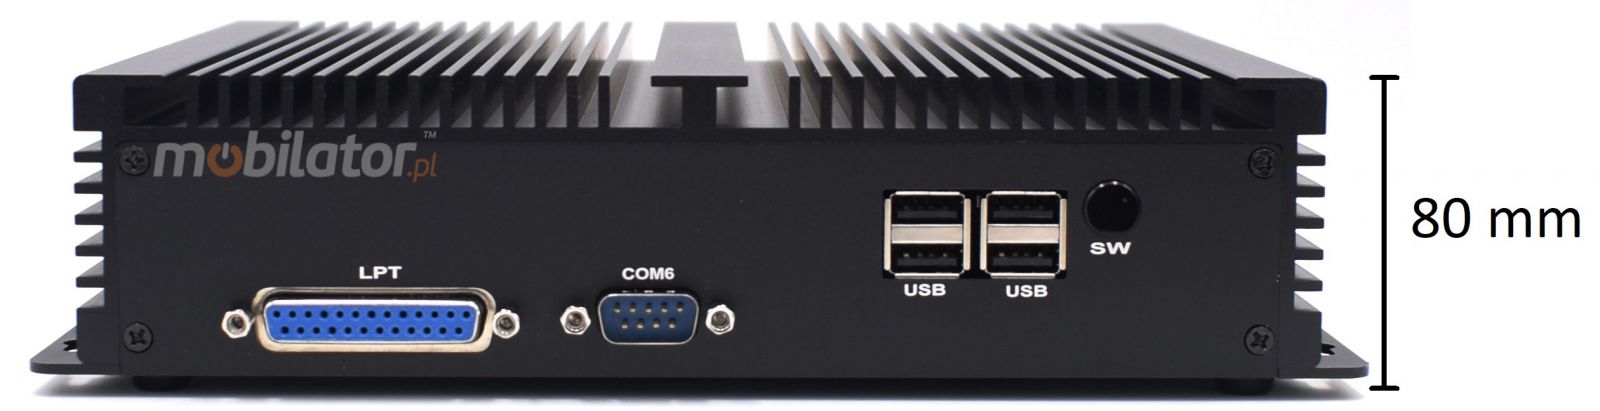 HyBOX H4 Intel i5 efficient universal and specialized industrial computer for wholesalers with small dimensions